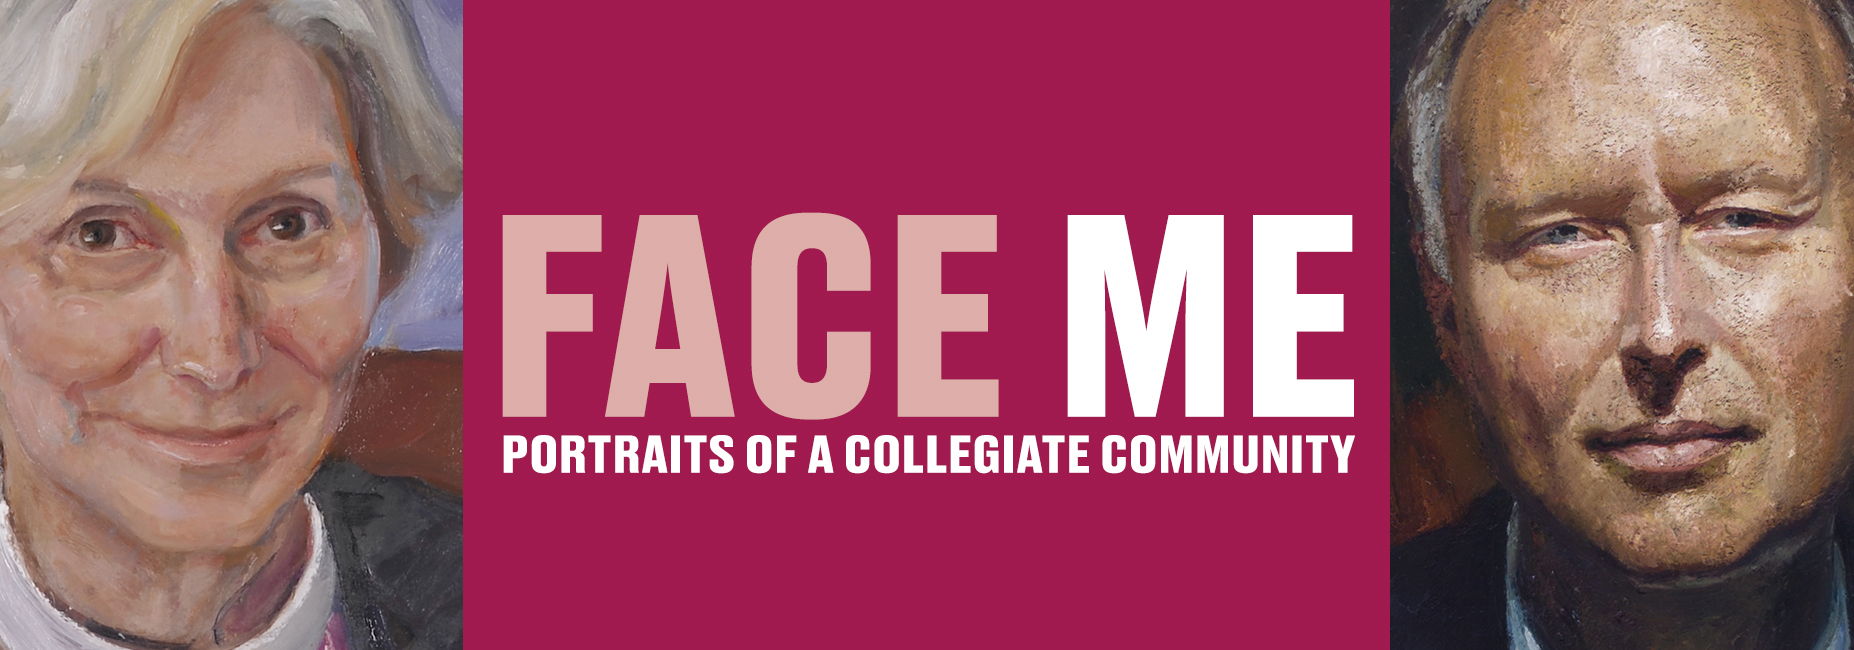 Face Me banner image